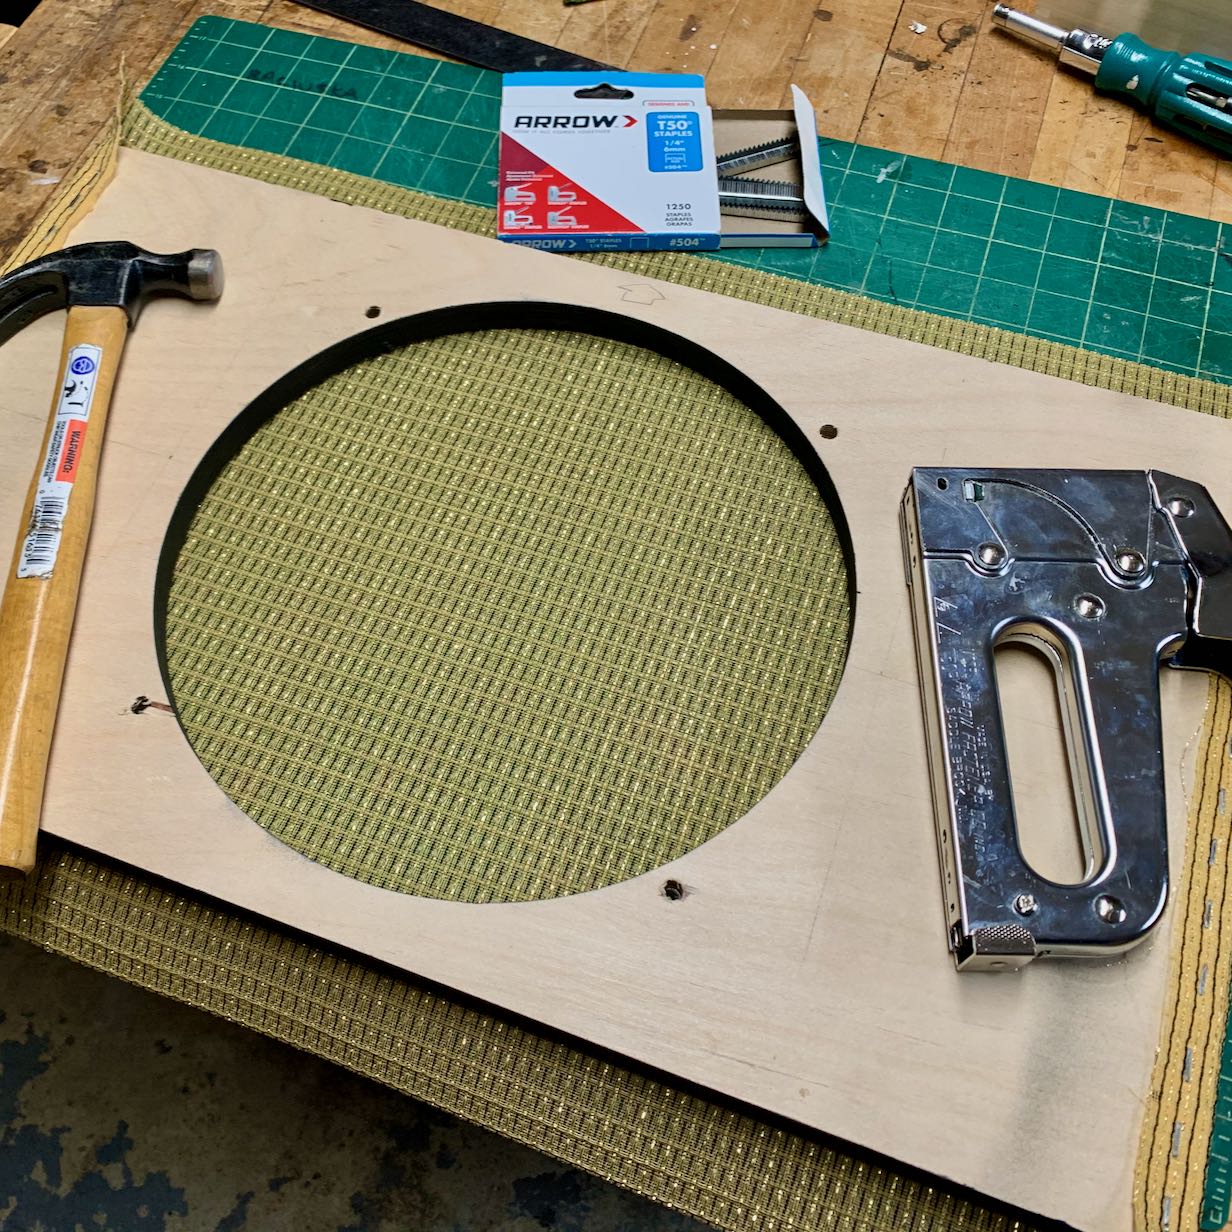 Build process photo showing gold striped fabric being stapled to the speaker baffle